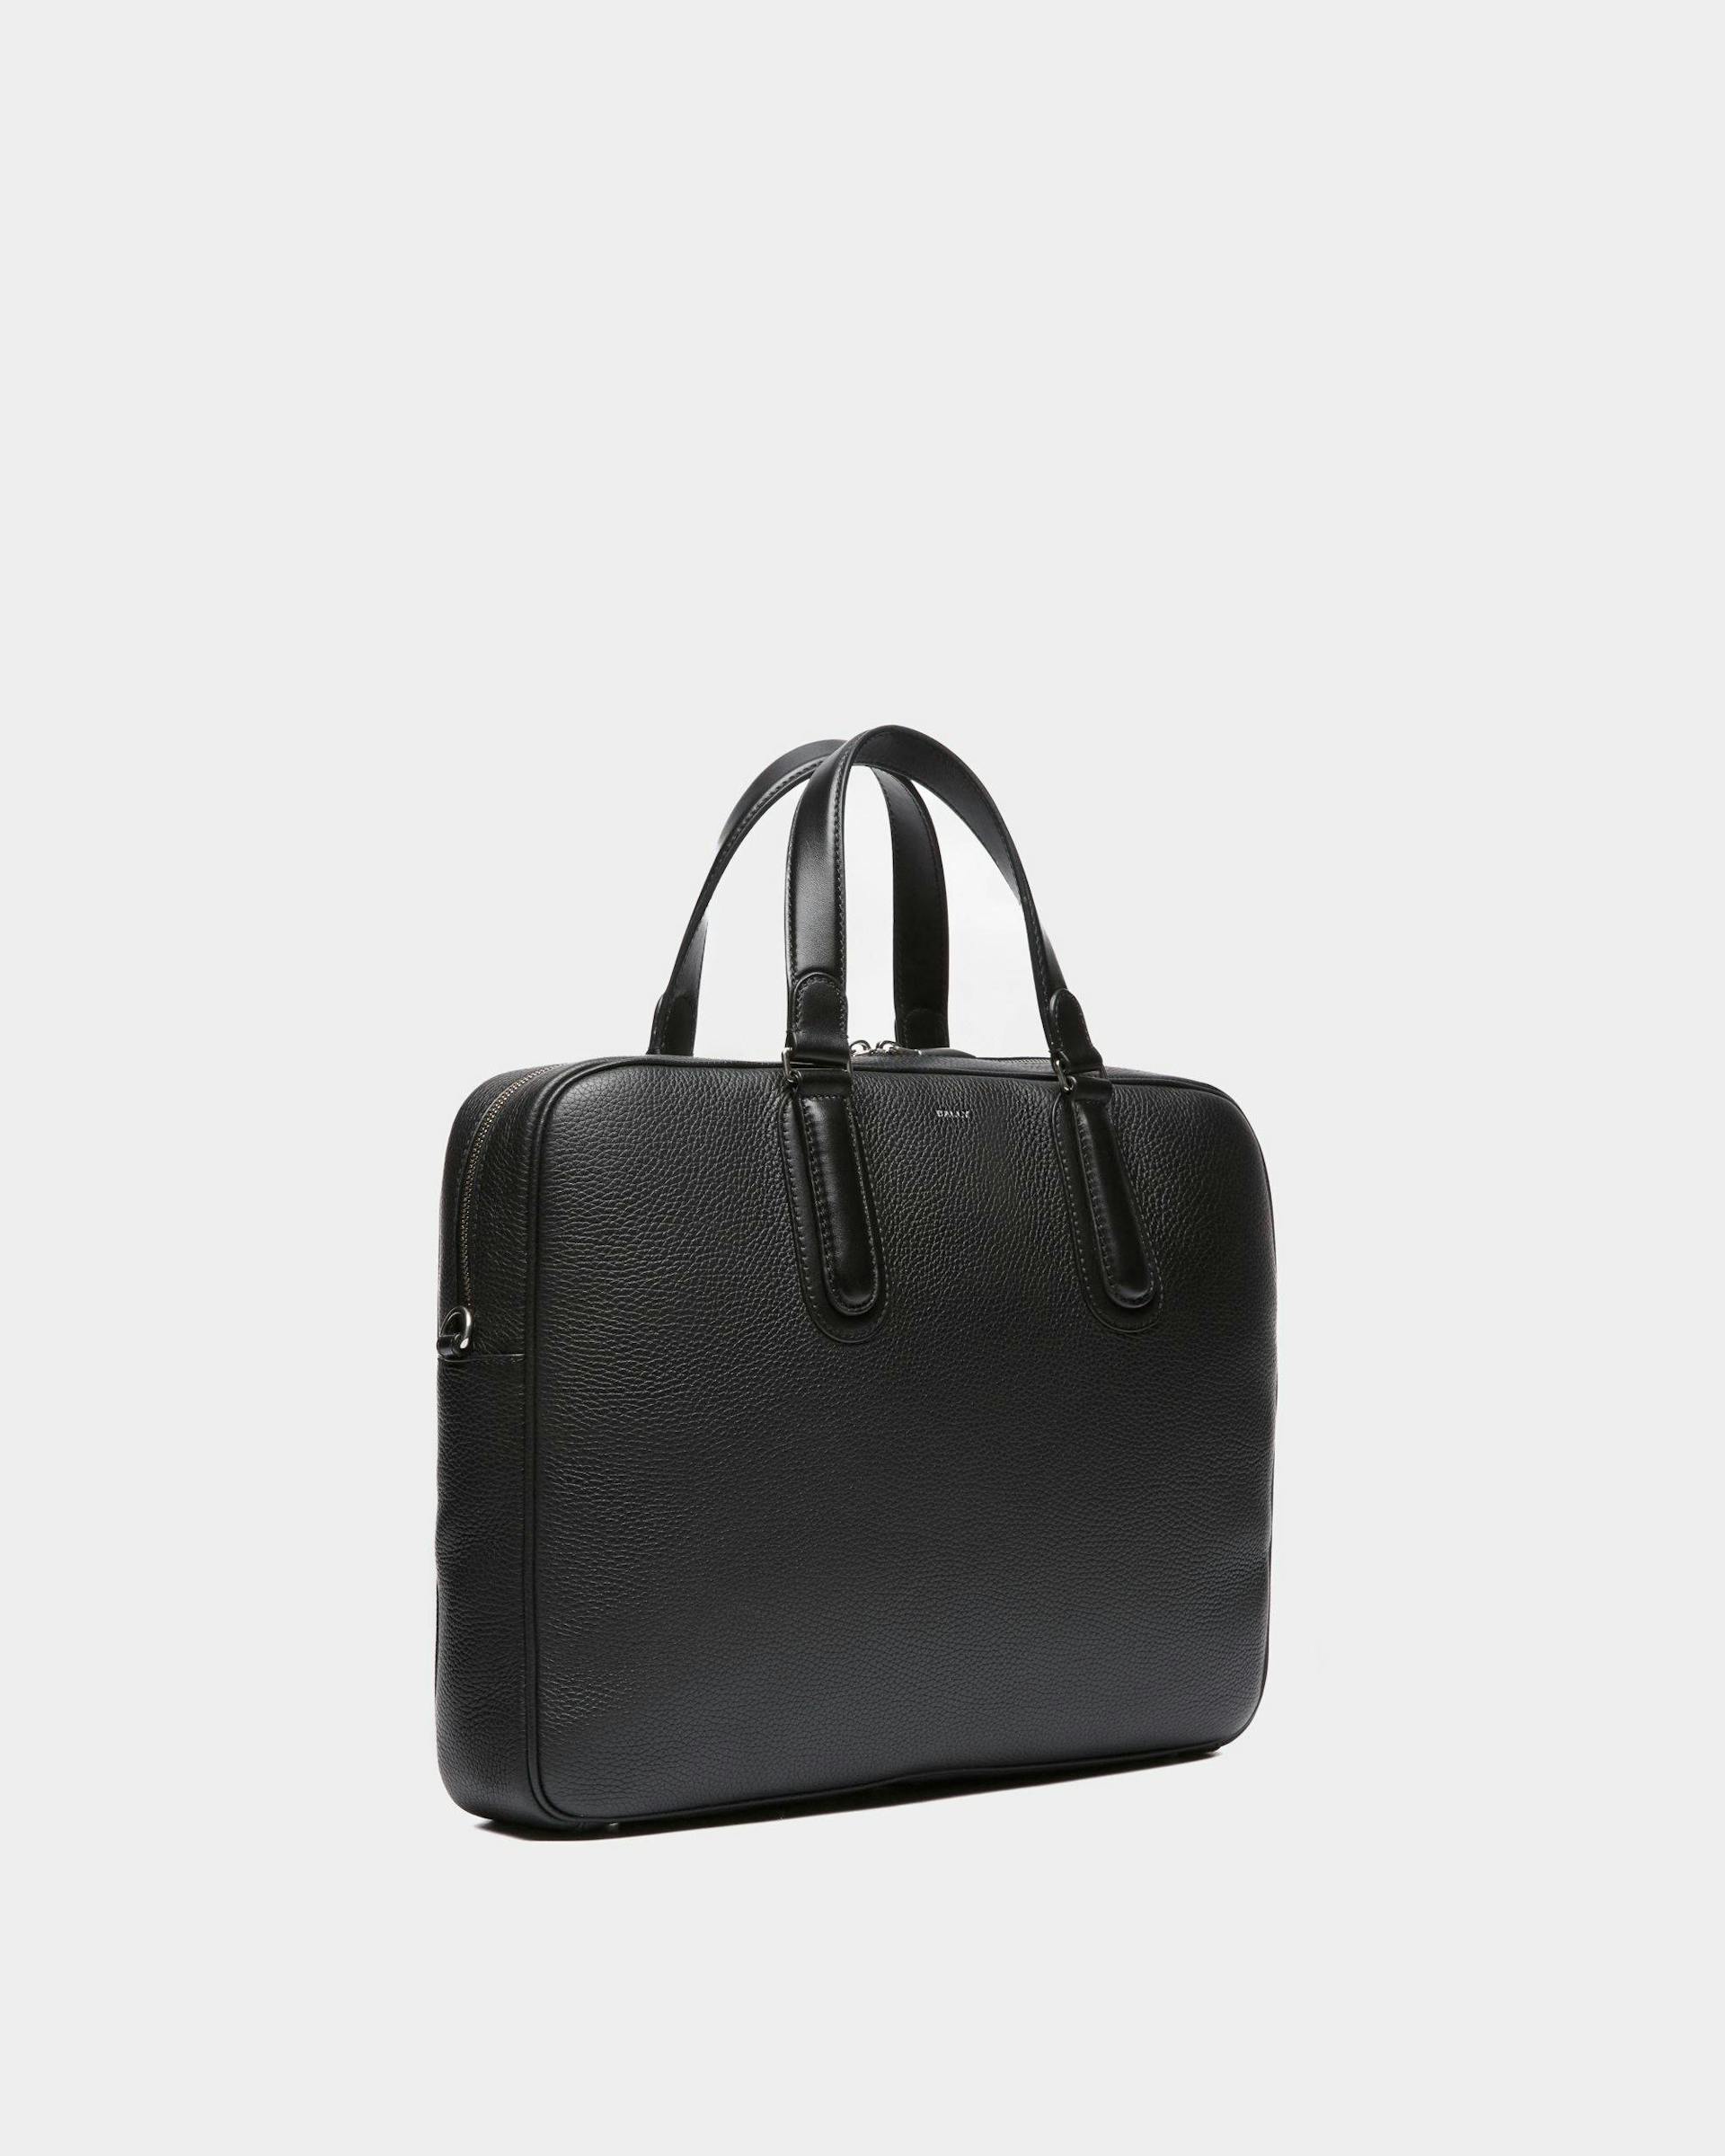 Men's Spin Briefcase In Black Grained Leather | Bally | Still Life 3/4 Front